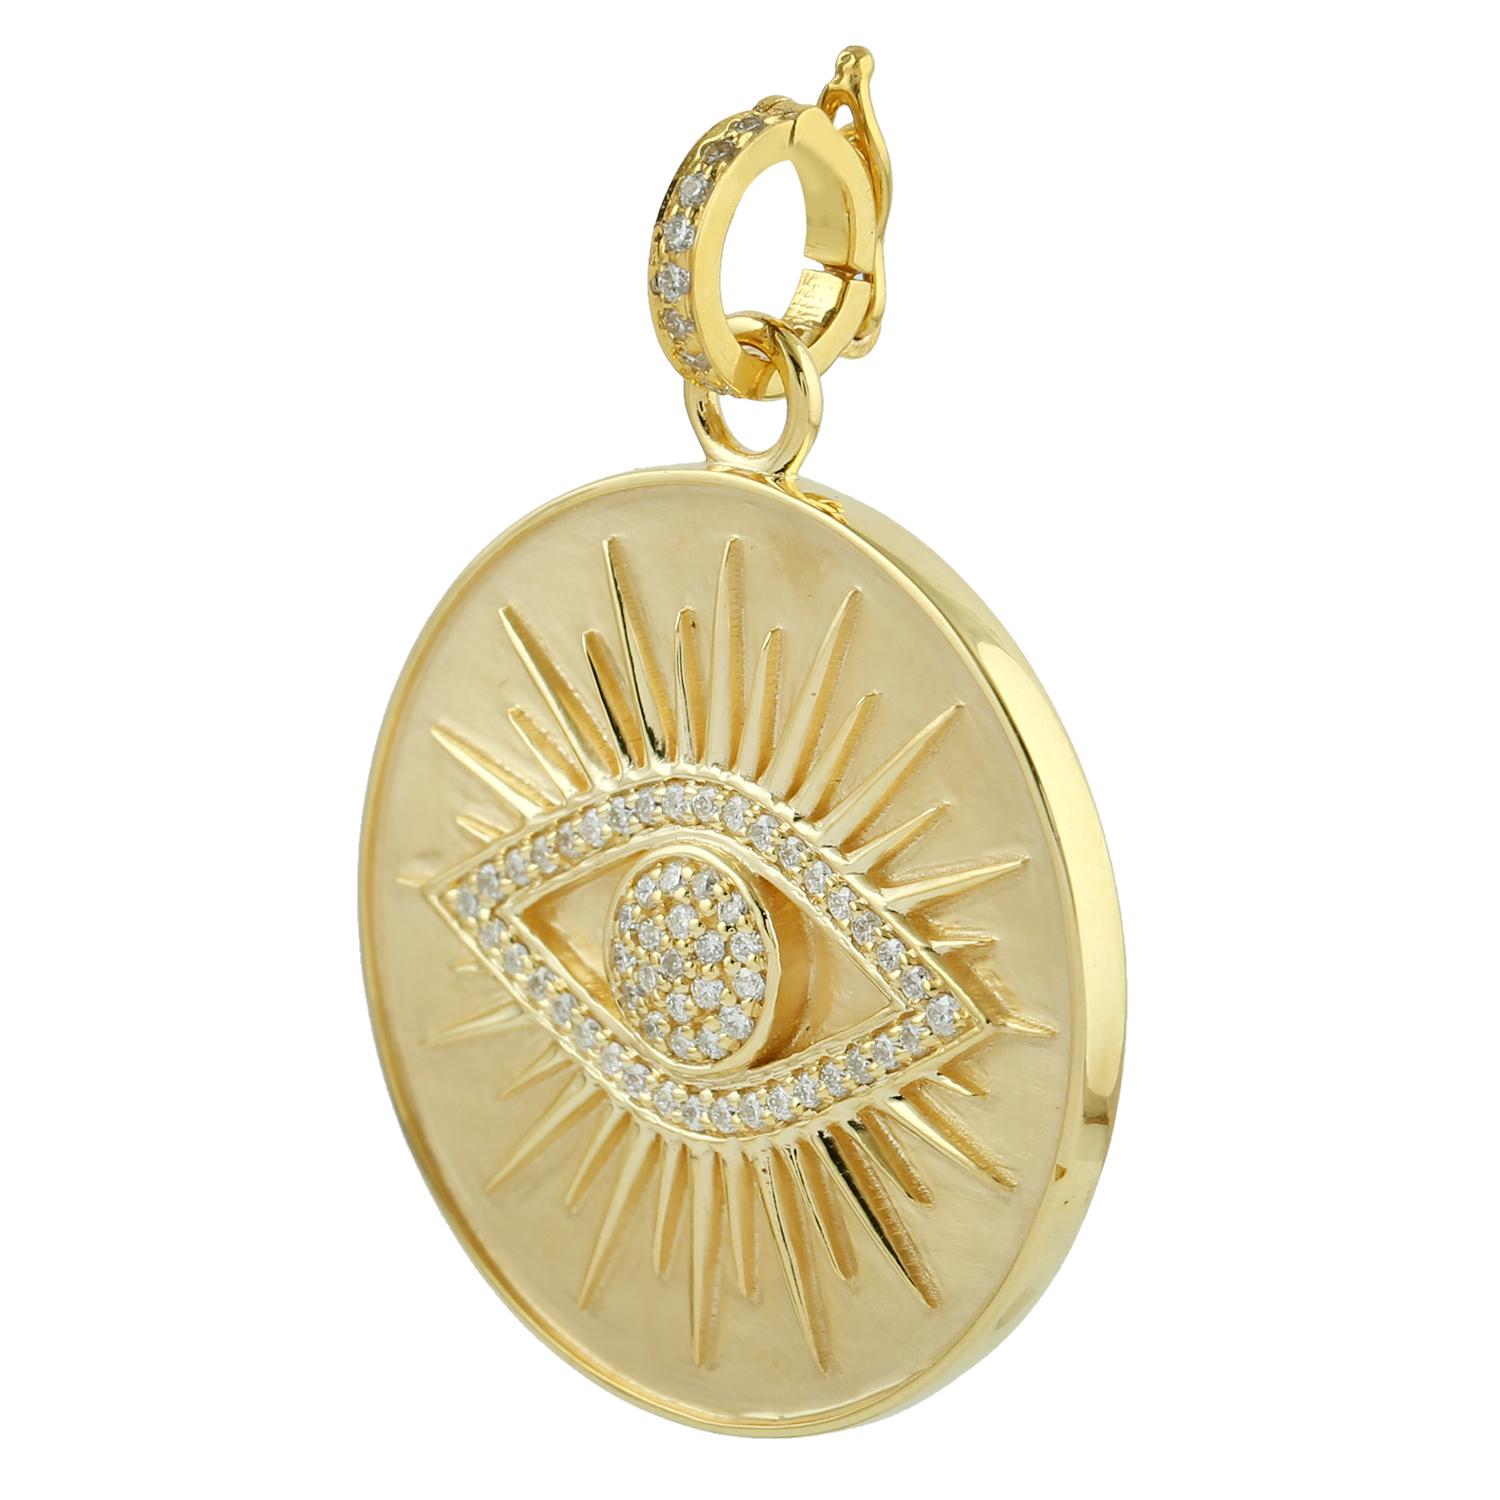 The 14 karat gold pendant medallion is set with .32 carats of shimmering diamonds. Evil Eye symbolizes to ward off negative energy. It promises to keep you safe and sound, which is the most important thing when it comes to fulfilling your dreams.